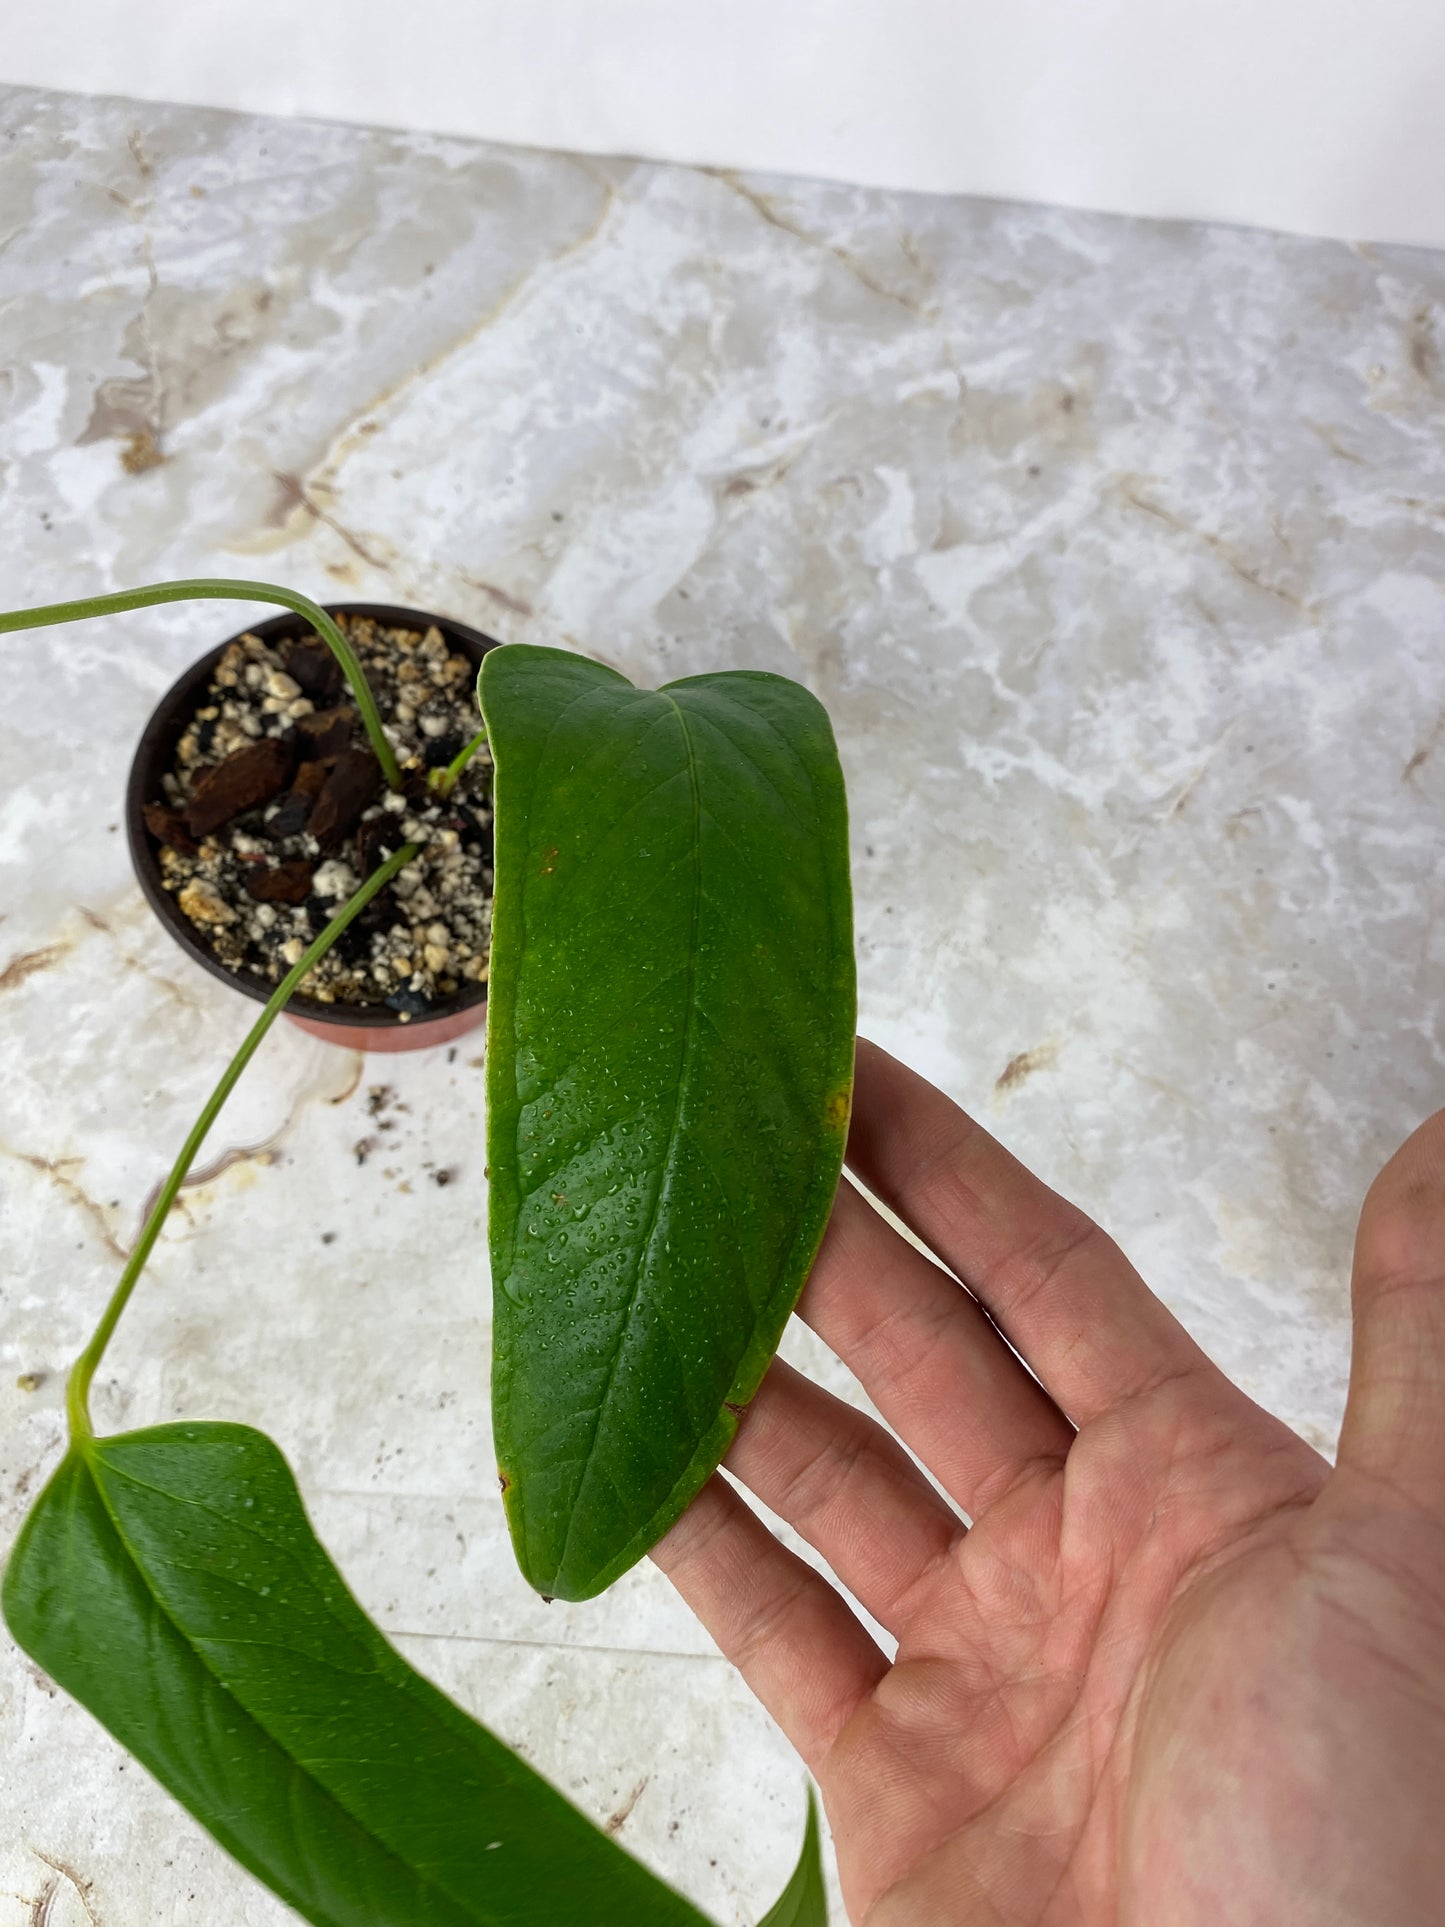 Do not buy: anthurium furcatum rooted